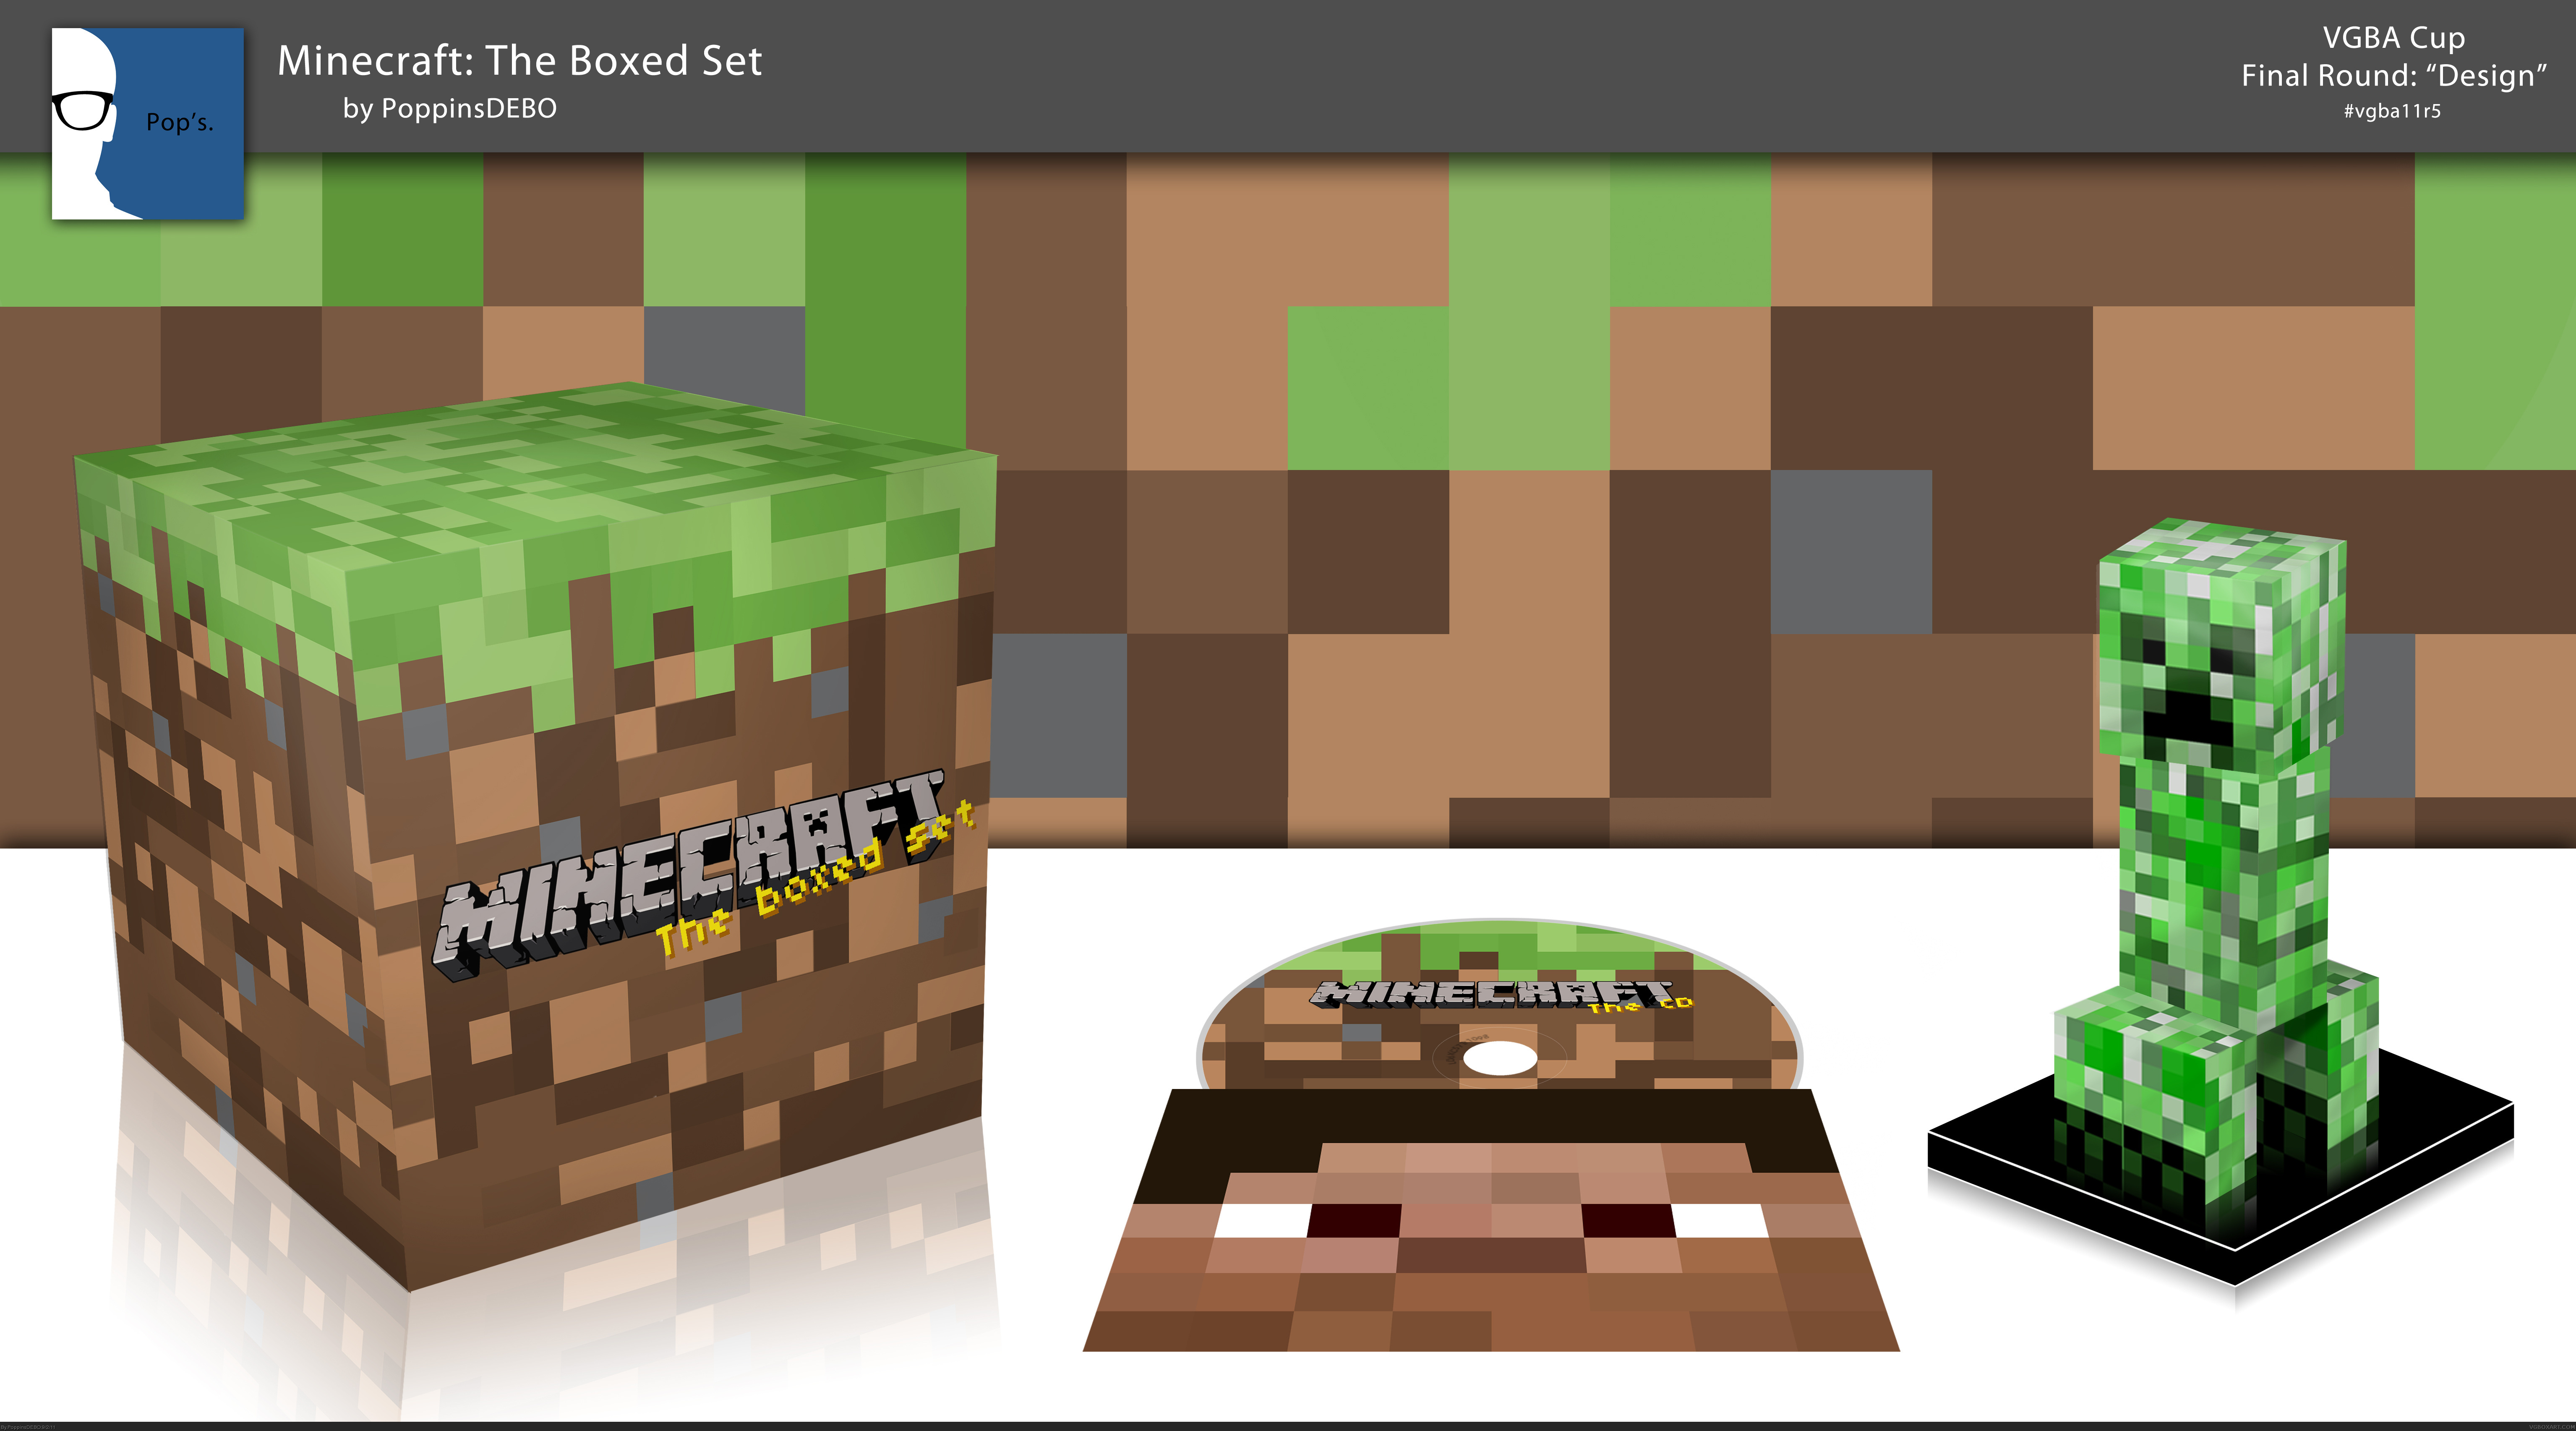 Minecraft: The Boxed Set box cover